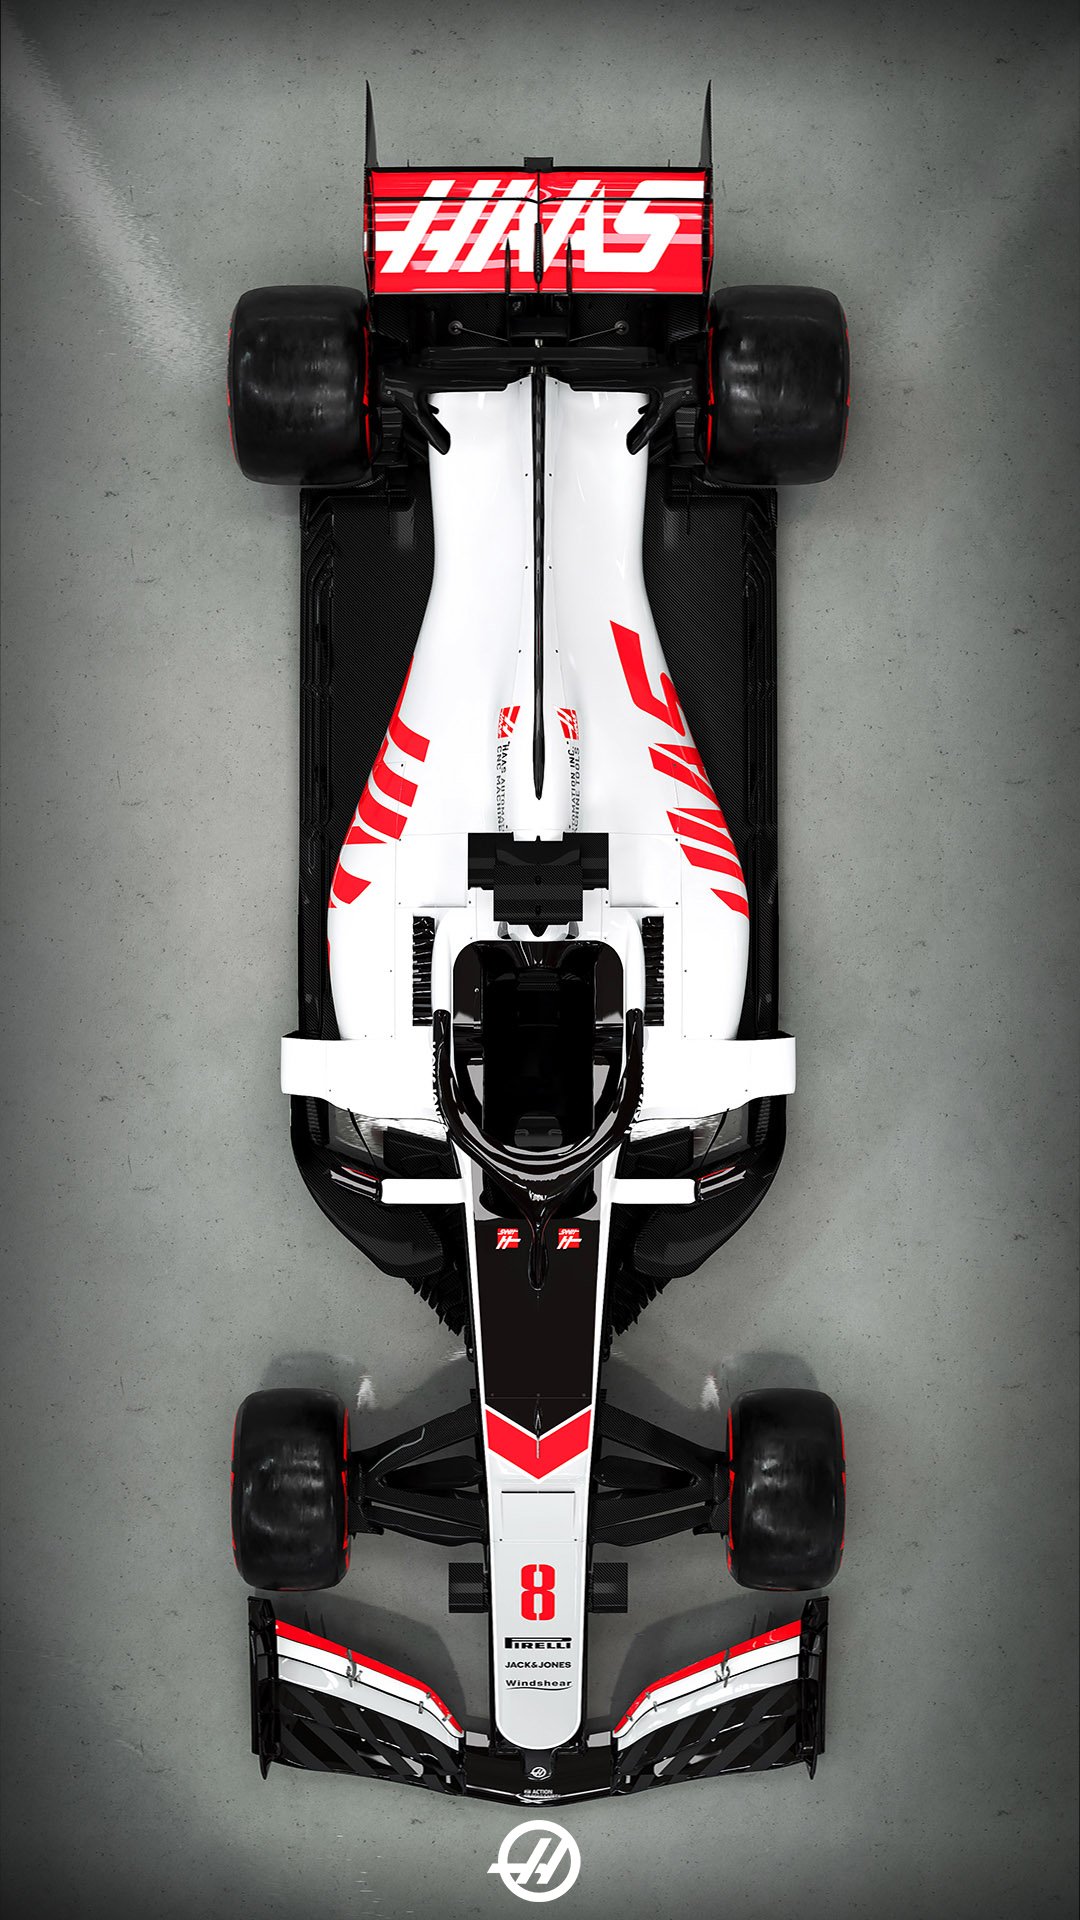 Haas F1 Team A Couple Of New Look Wallpaper For Your Screens